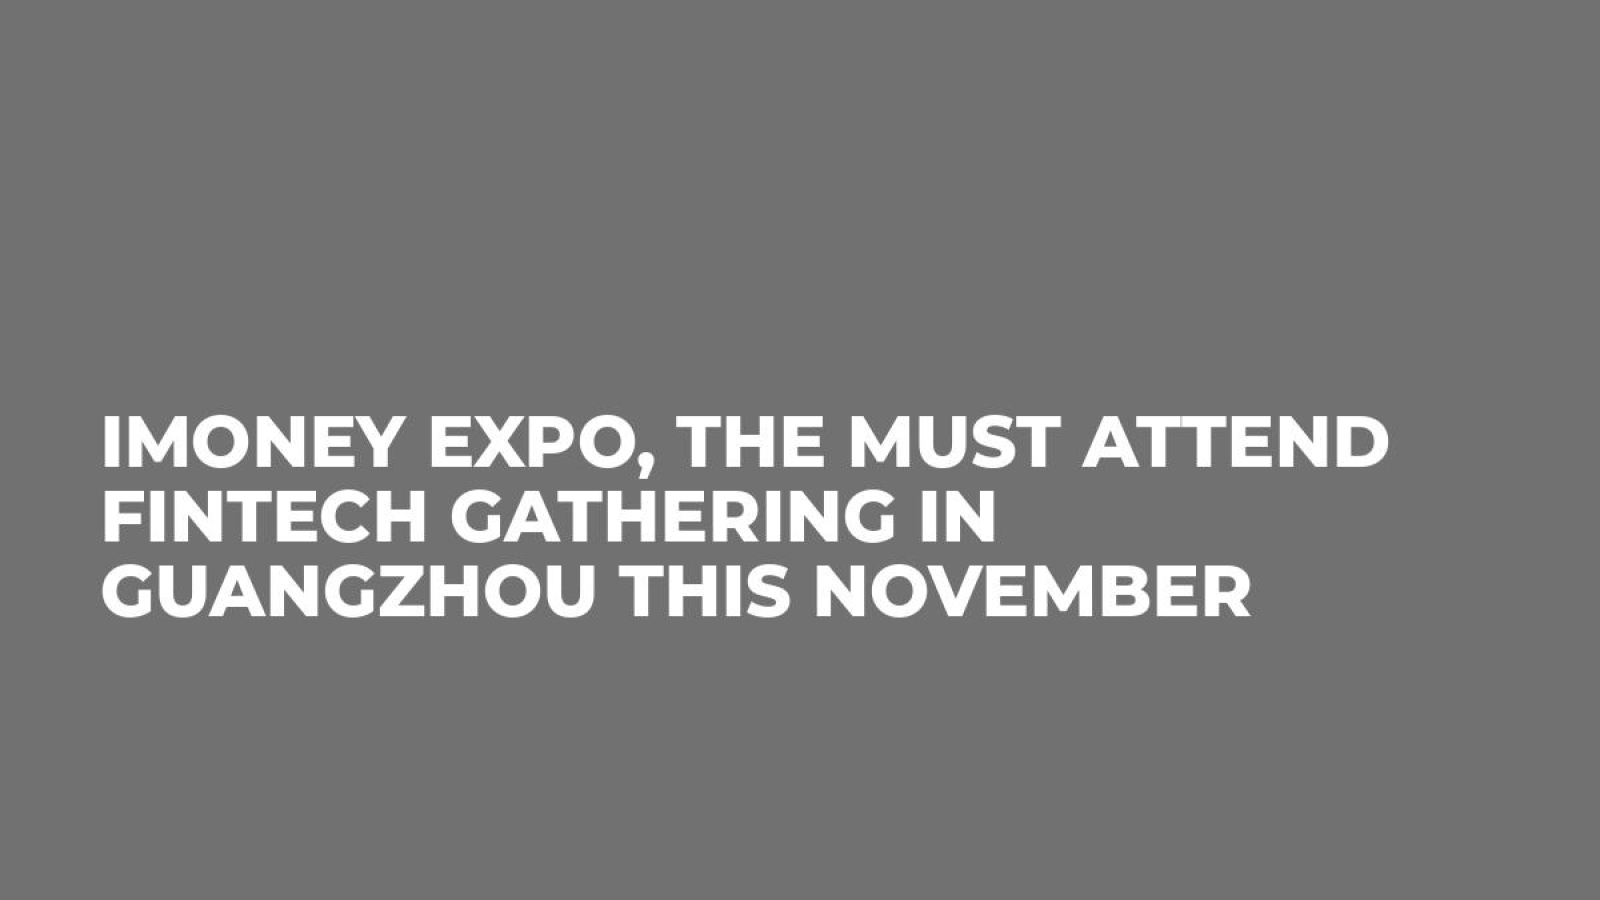 iMoney Expo, the Must Attend Fintech Gathering in Guangzhou This November